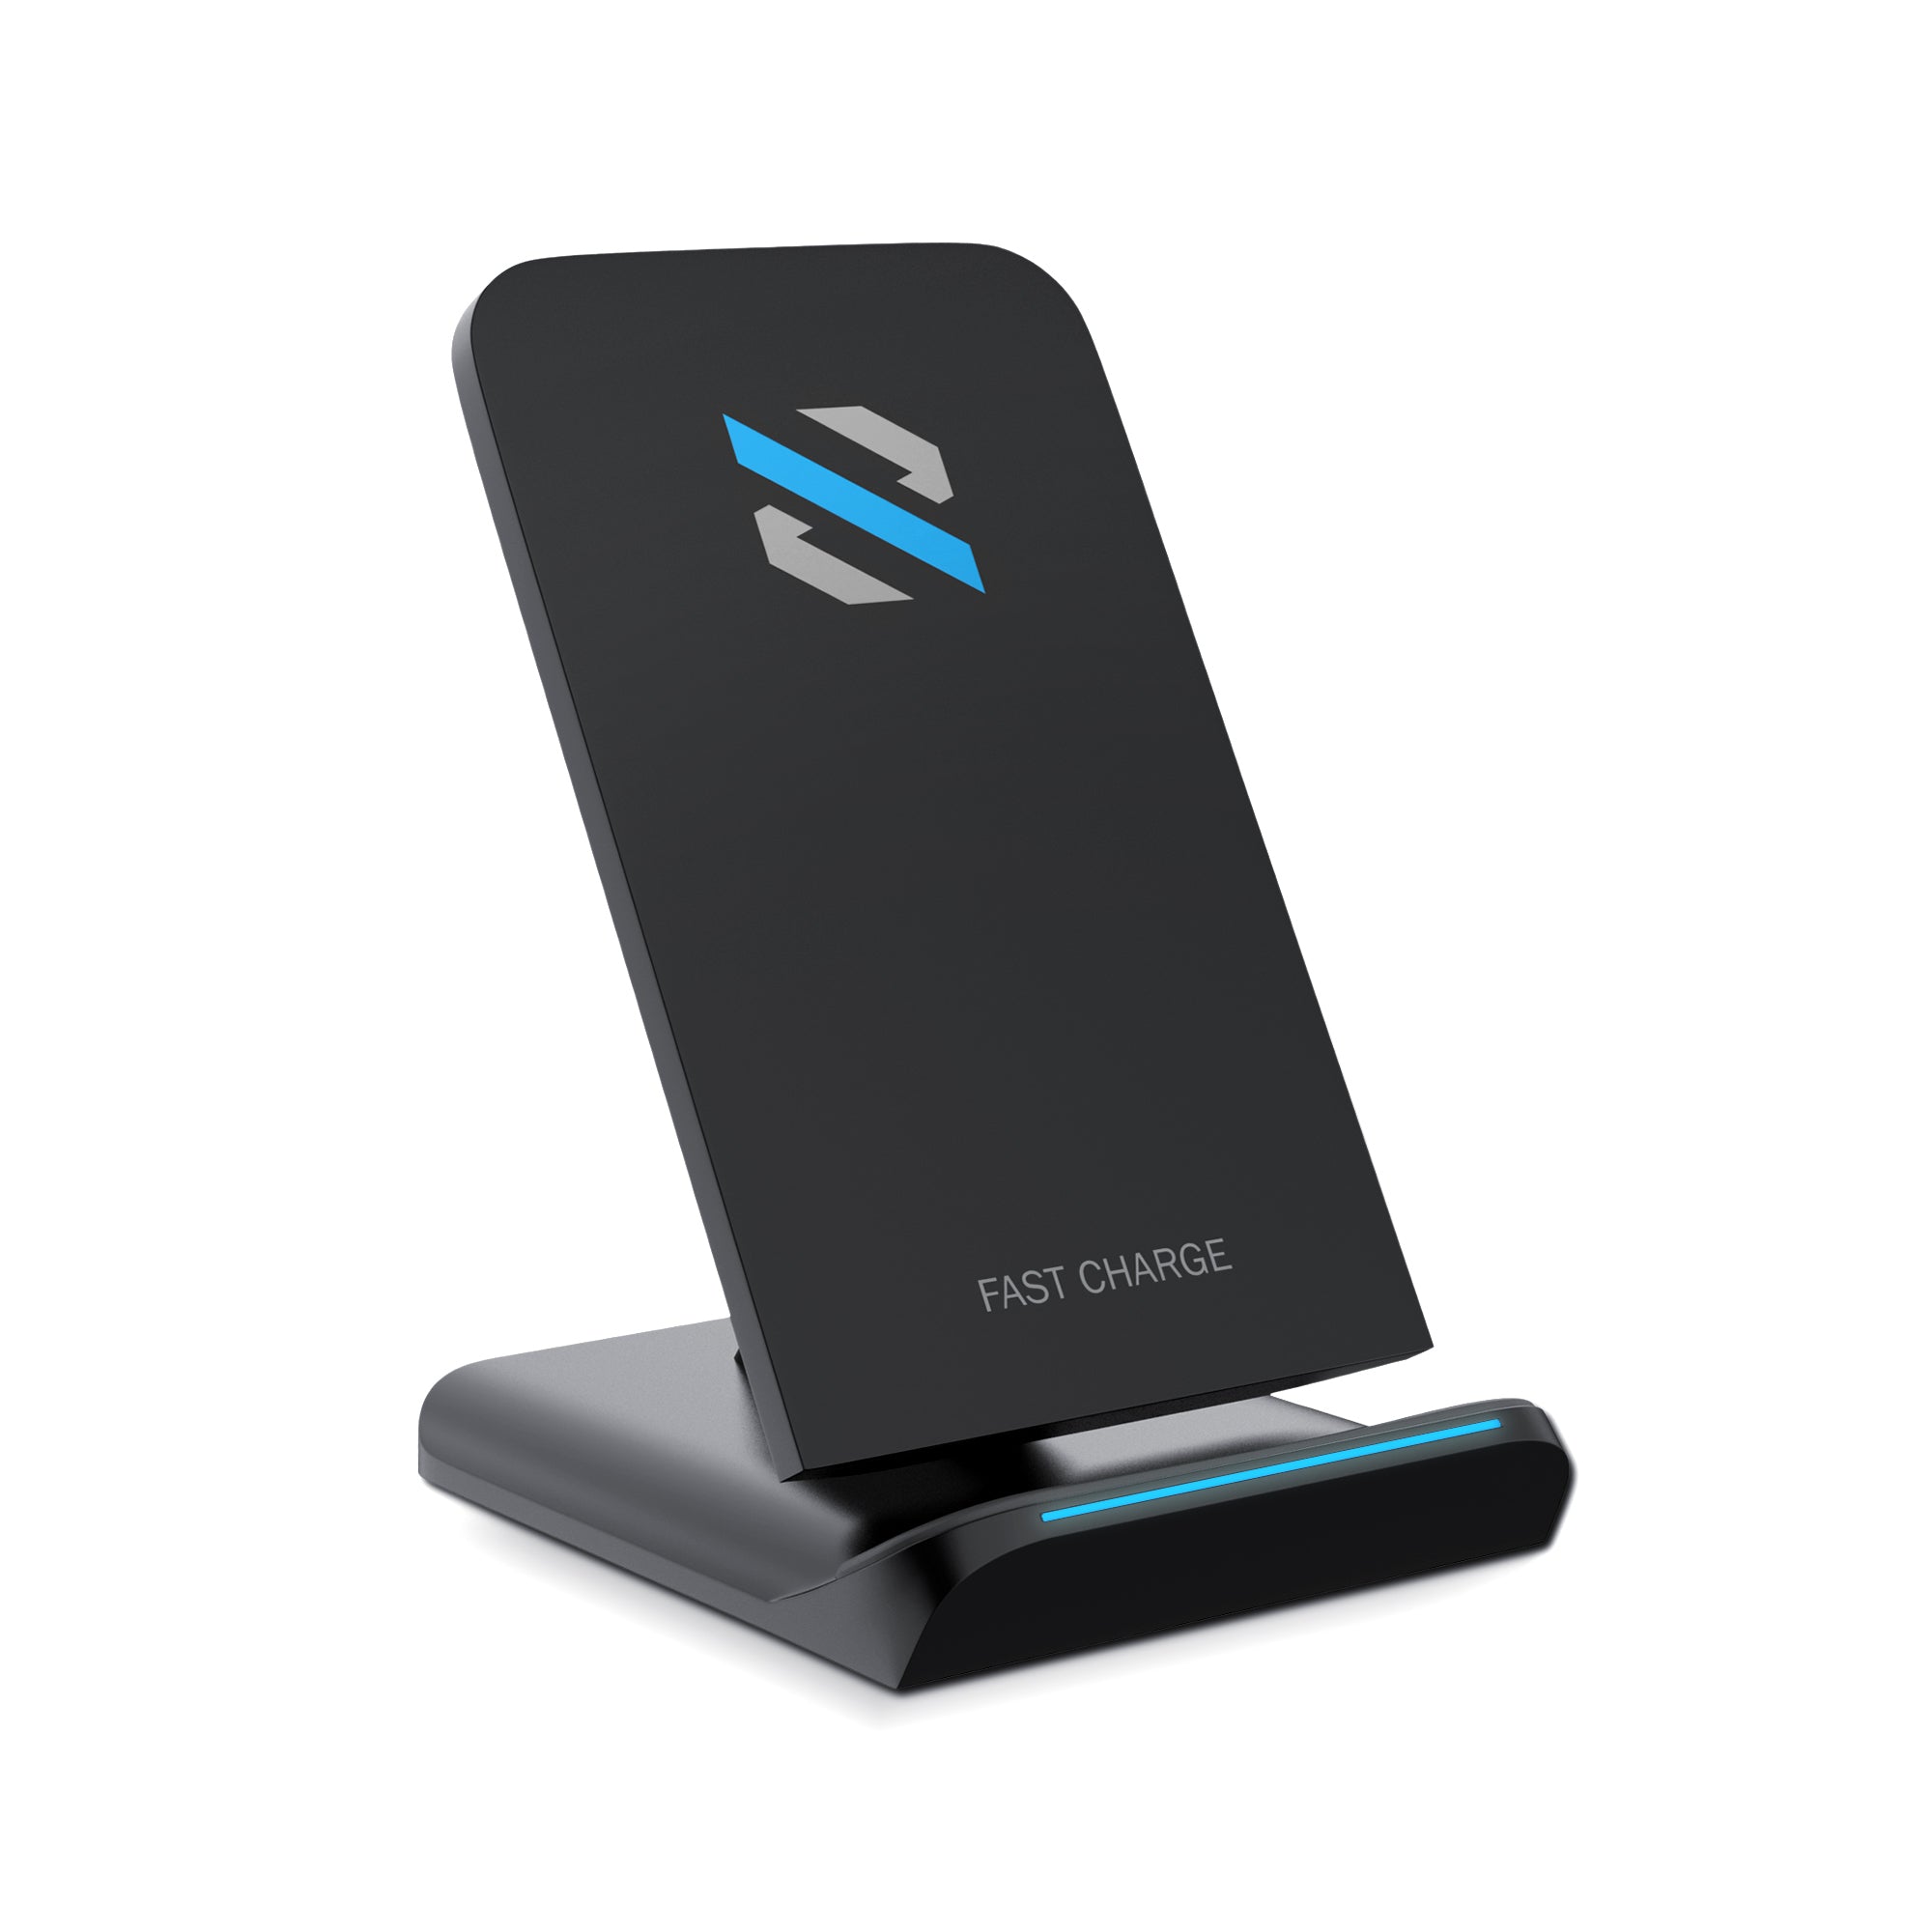 SKYVIK Beam 2 15W Qi Fast Wireless Charger-Type C with Dual Coils for iPhone Samsung & Other Compatible Devices